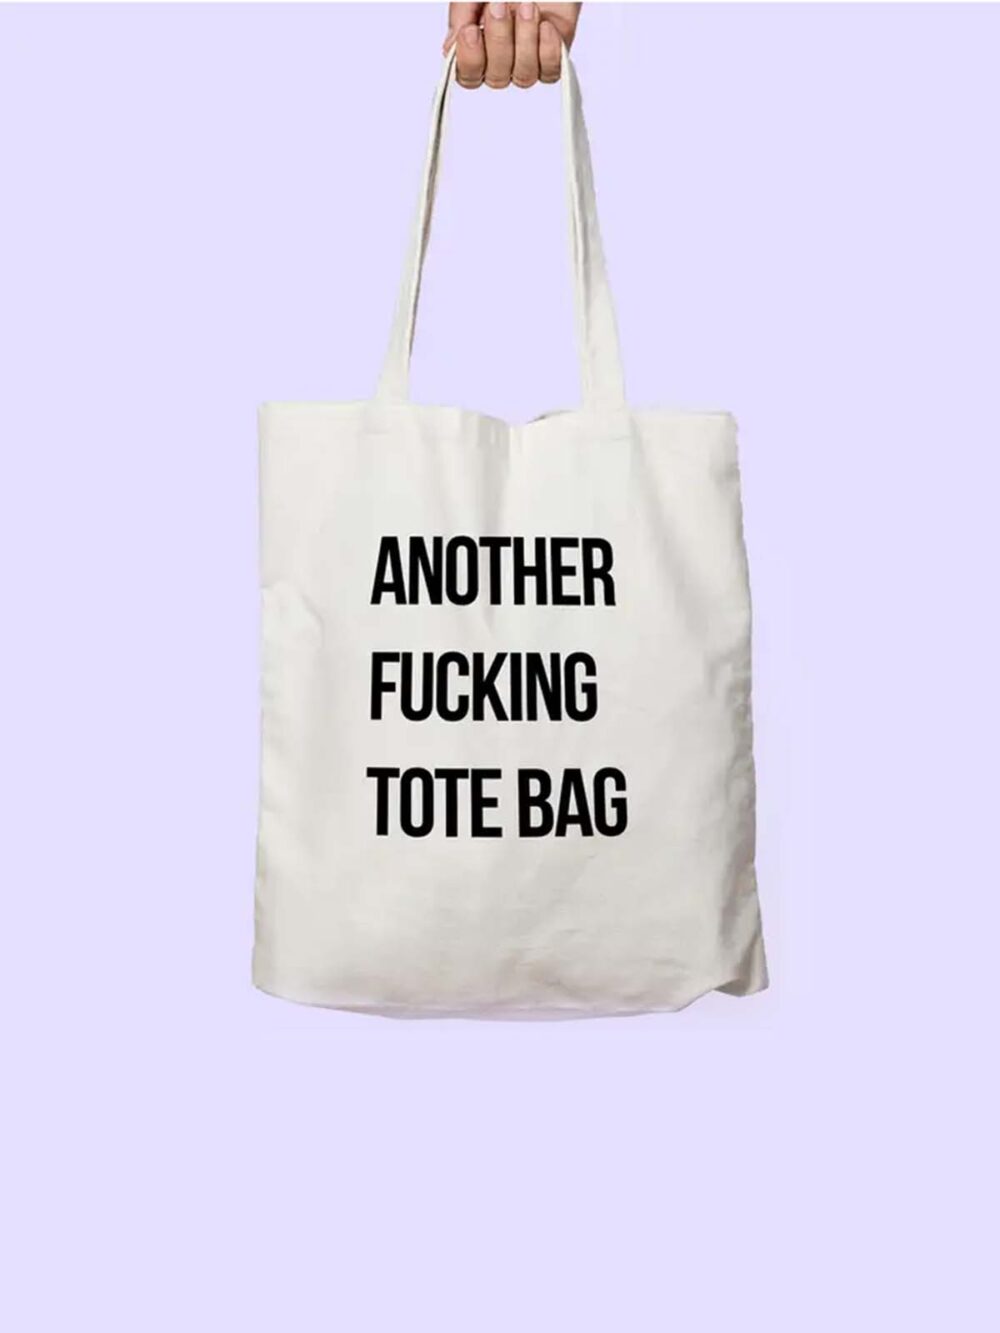 remix by sofie, totebag, indkøbsnet, another fucking tote bag